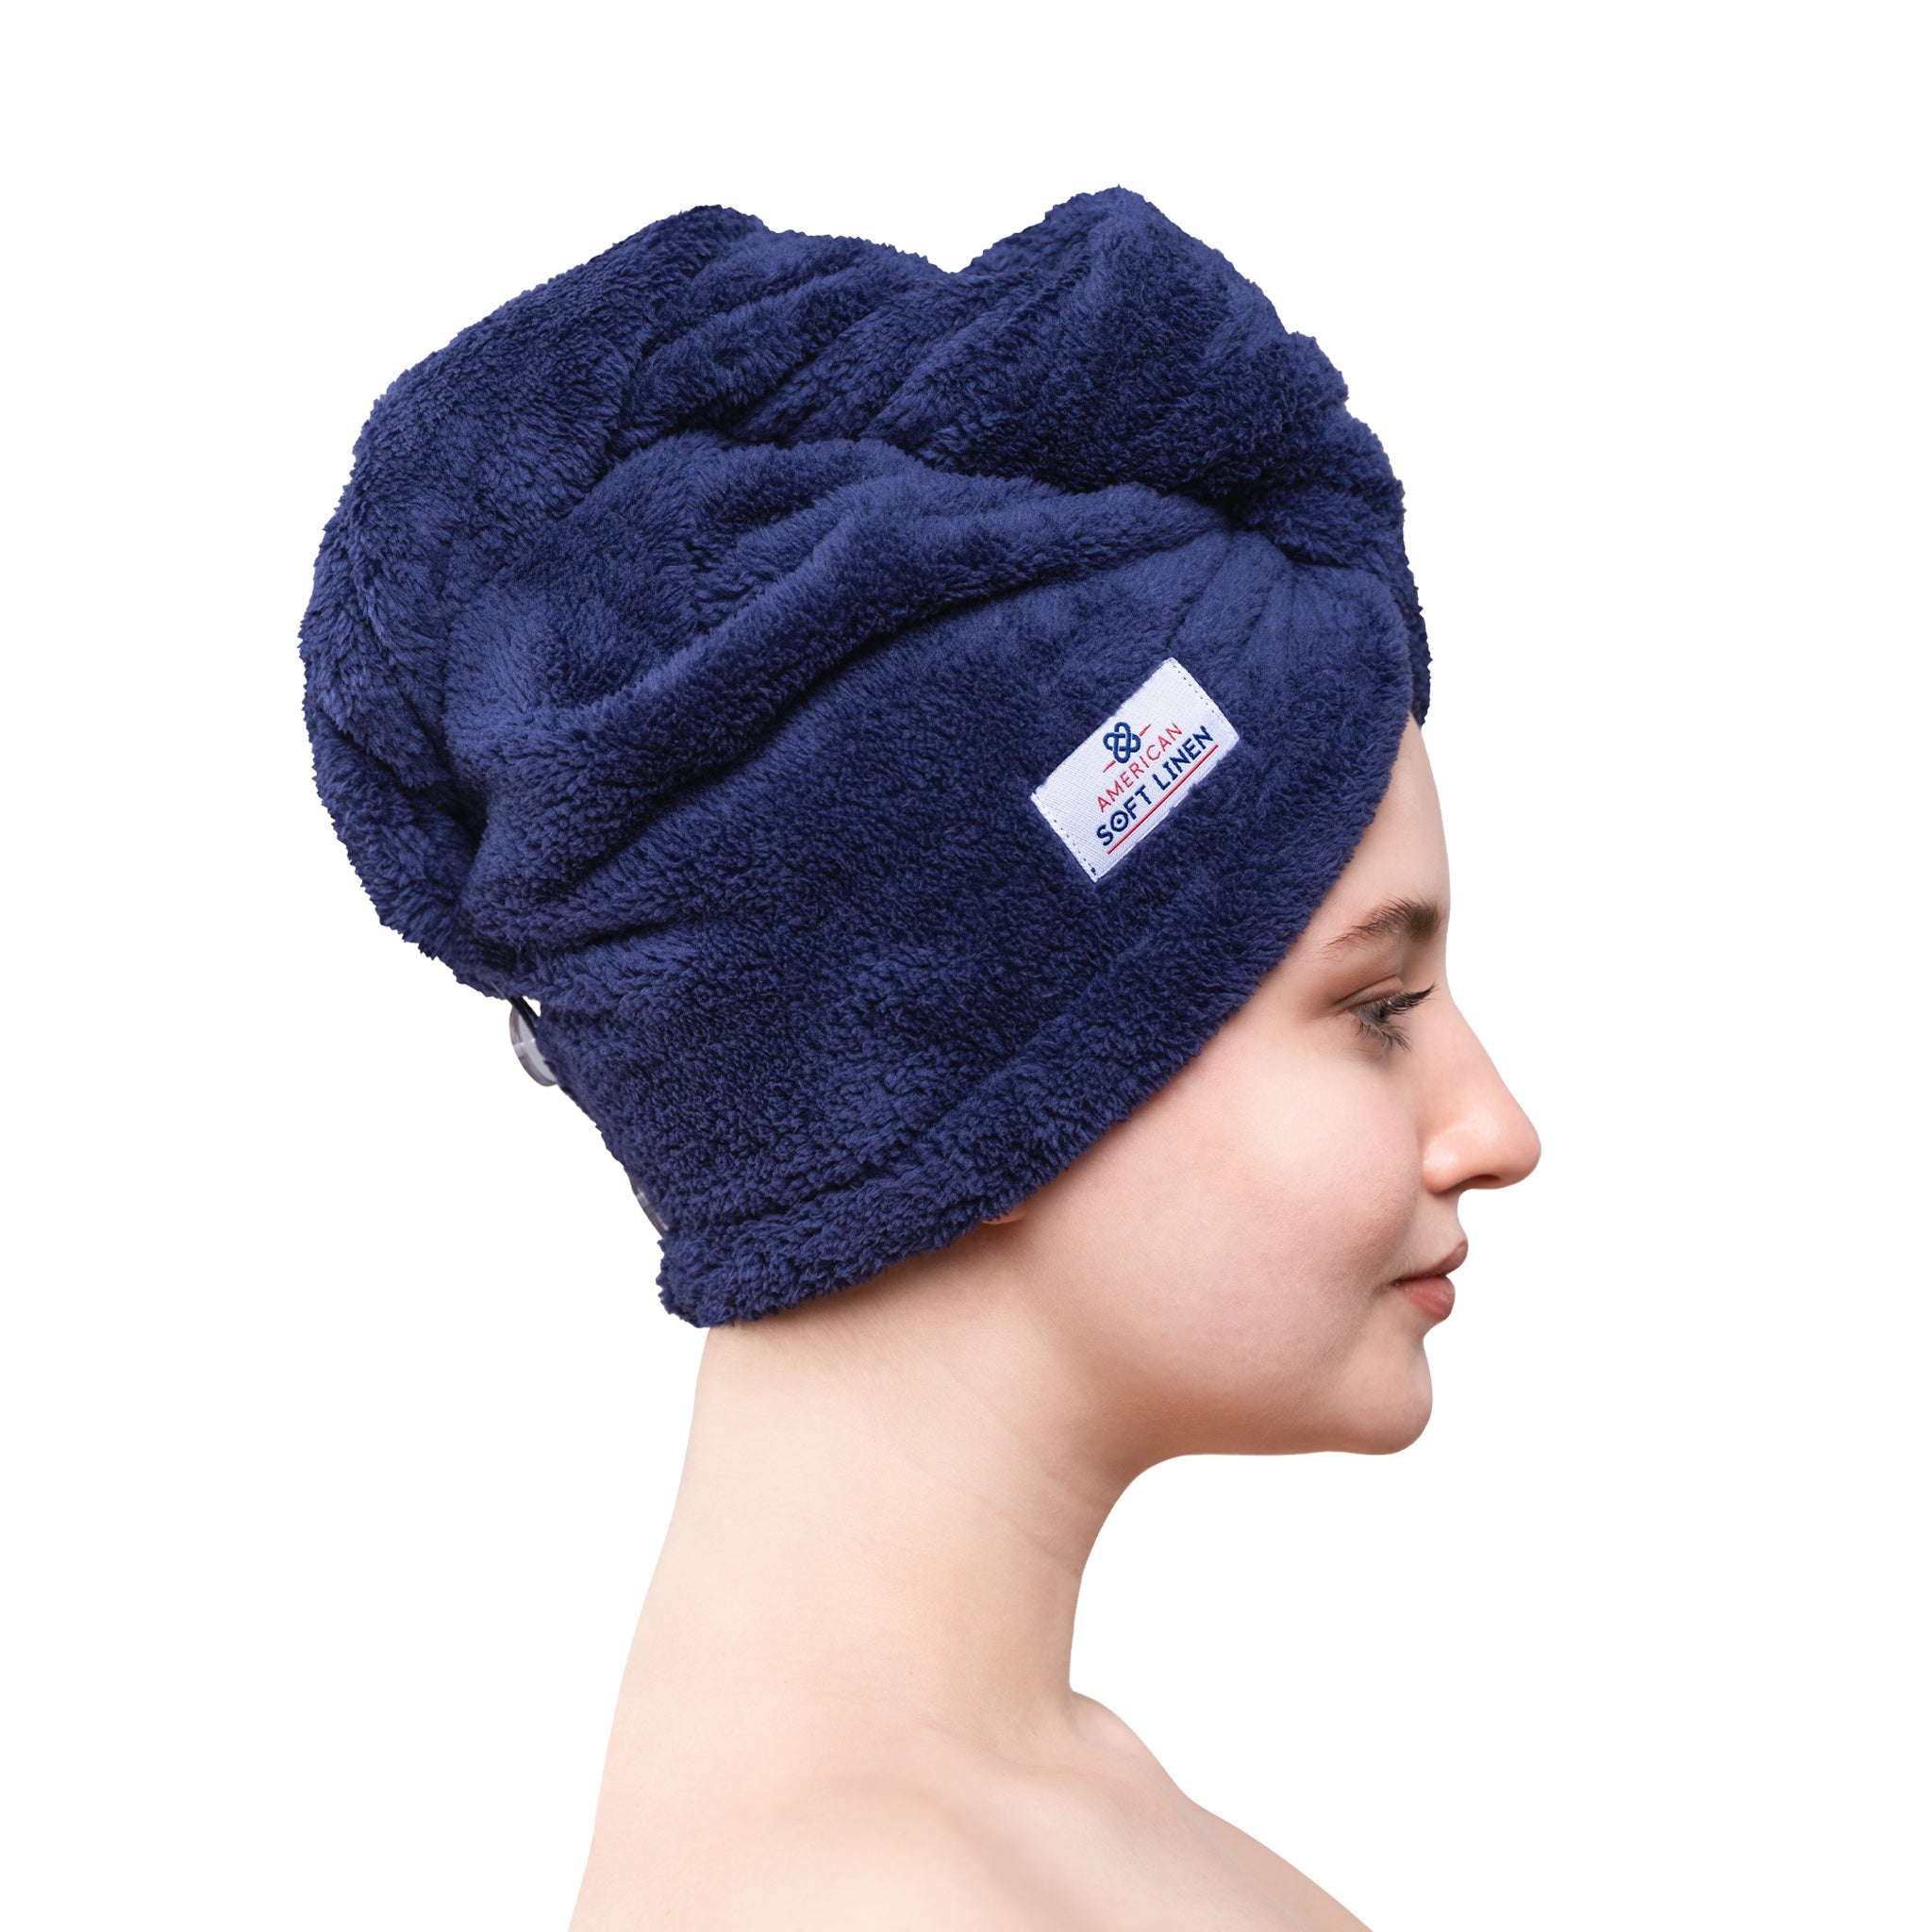 American Soft Linen Extremely Soft Super Absorbent and Fast Drying Hair Towel -2-packed-blue-2